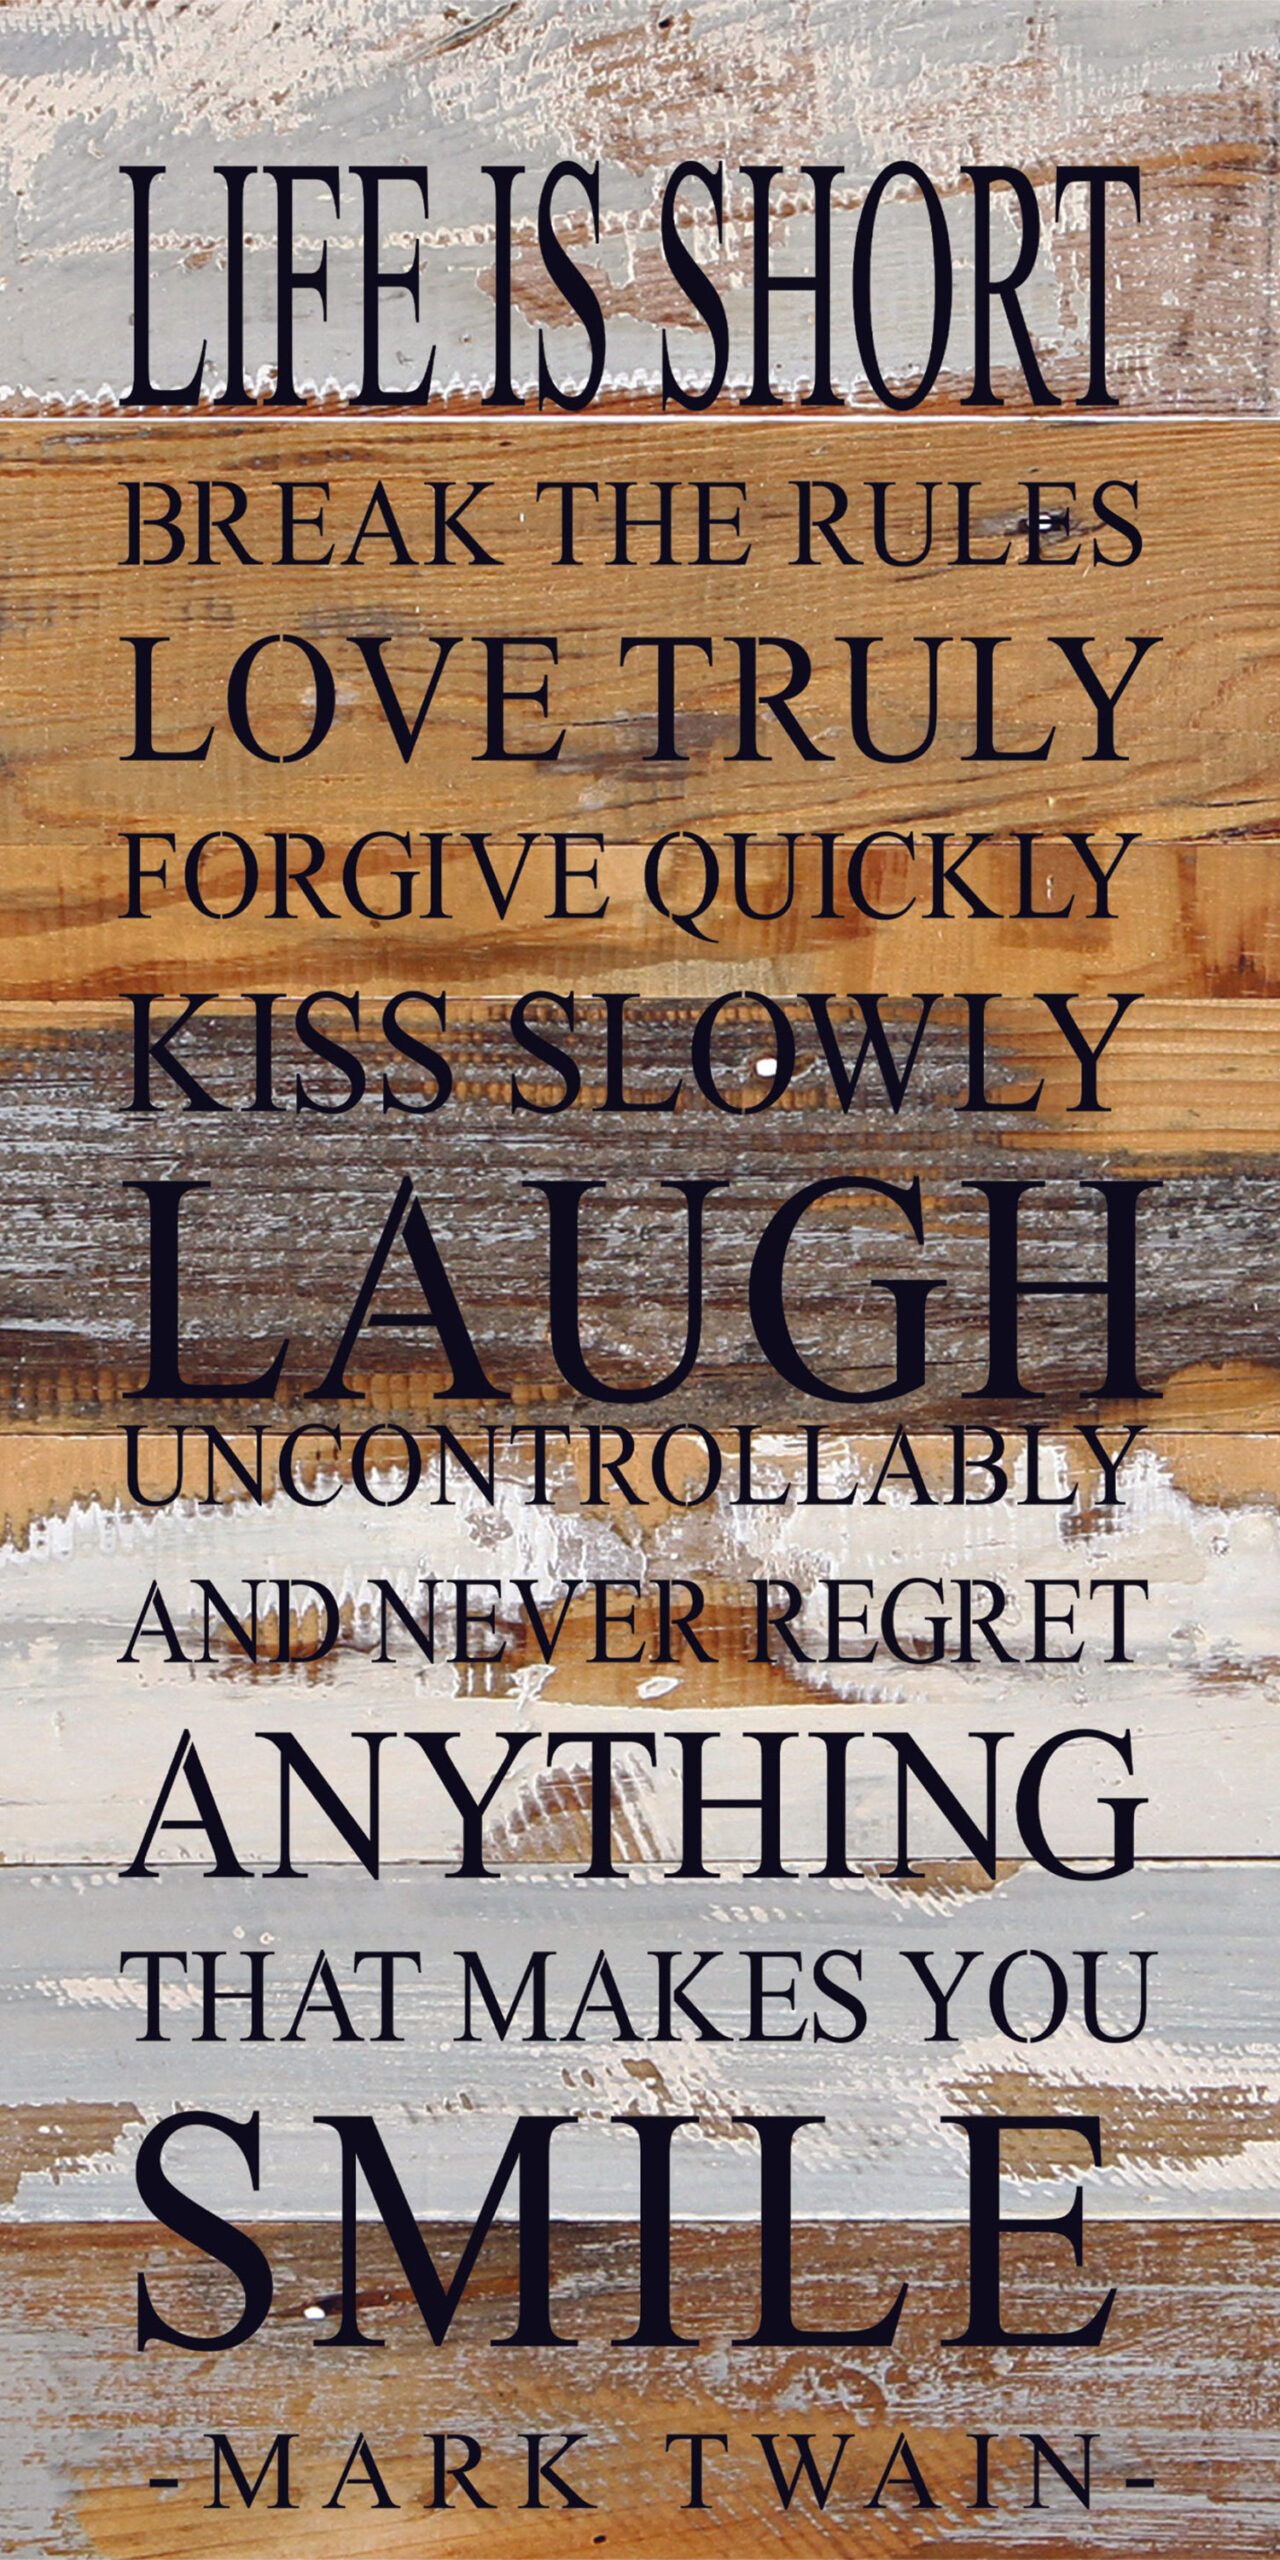 Life is short. Break the rules. Love truly. Forgive quickly. Kiss slowly. Laugh uncontrollably, and never regret anything that makes you smile. -Mark Twain / 12"x24" Reclaimed Wood Sign